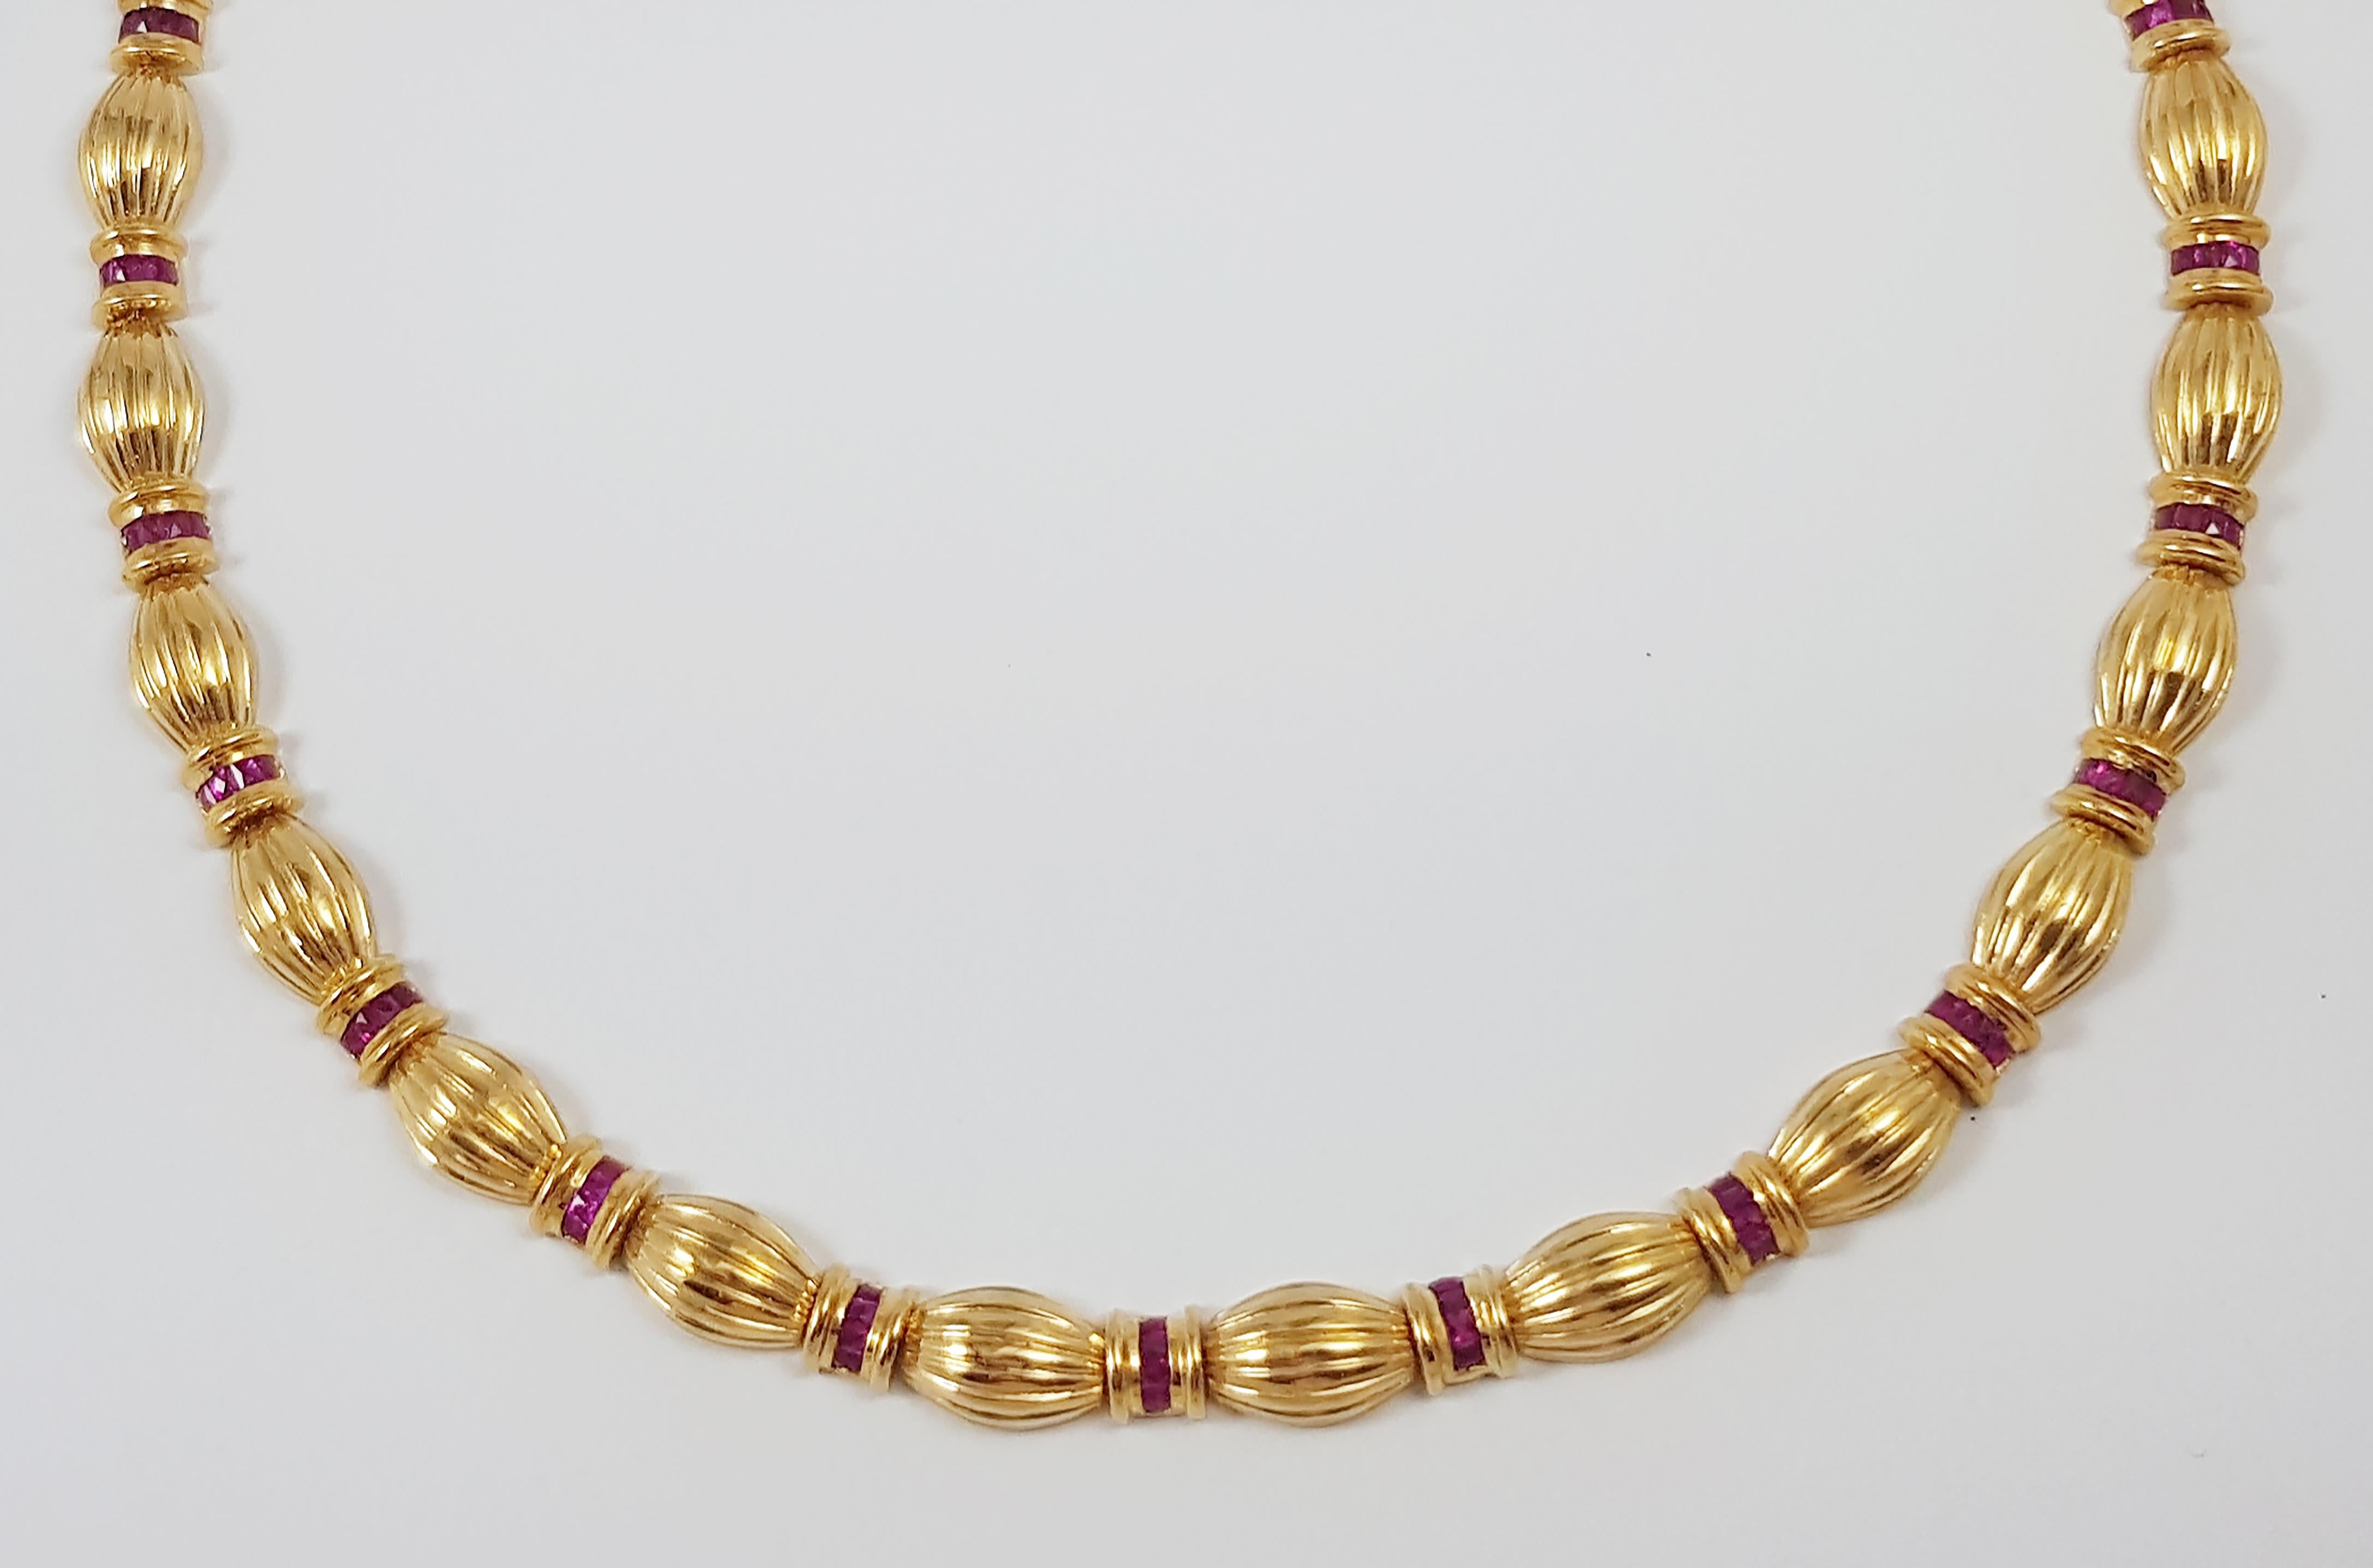 Ruby 6.36 carats Necklace set in 18 Karat Gold Settings

Width:  0.7 cm 
Length: 42.0 cm
Total Weight: 53.04 grams

